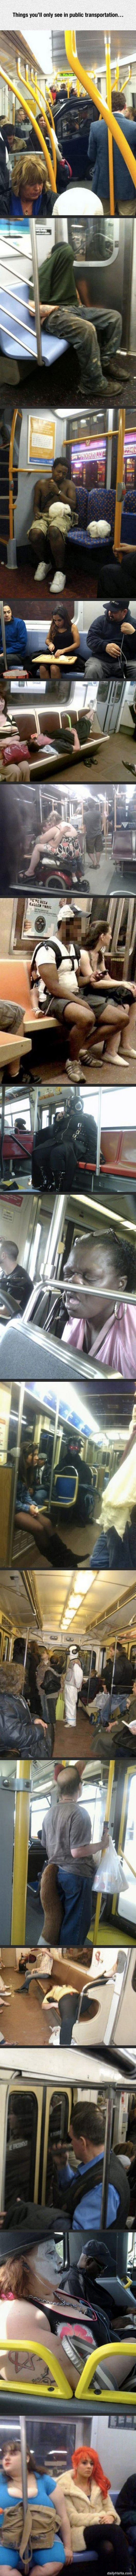 only on public transportation funny picture